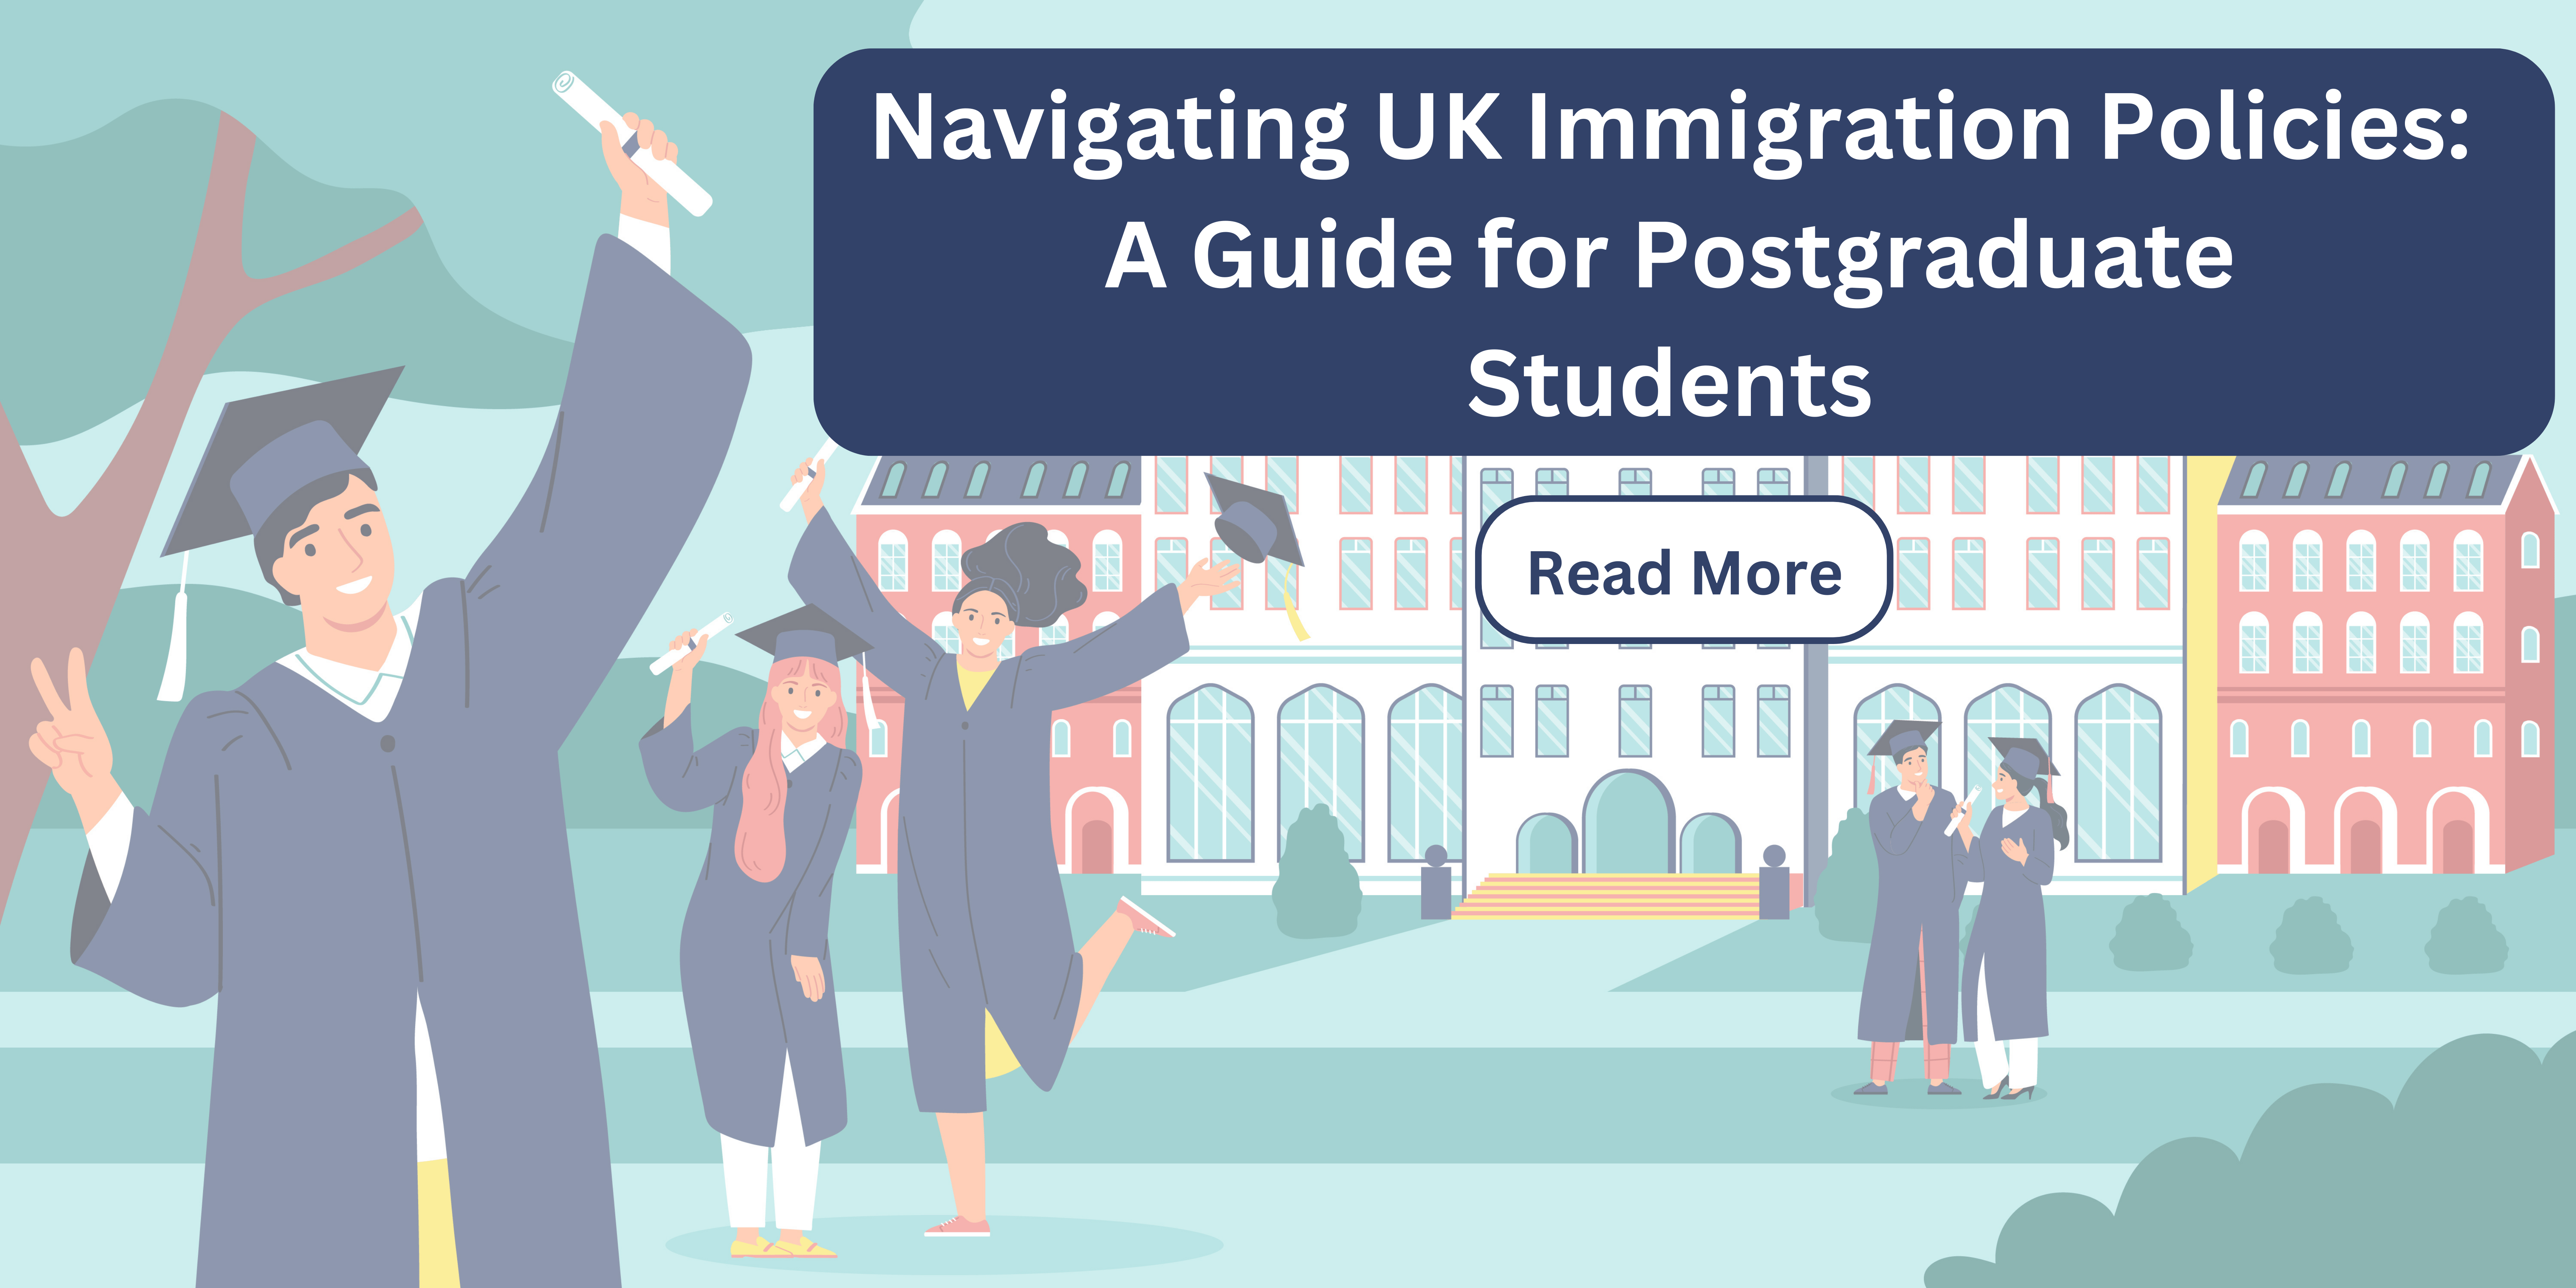 Navigating UK Immigration Policies: A Guide for Postgraduate Students